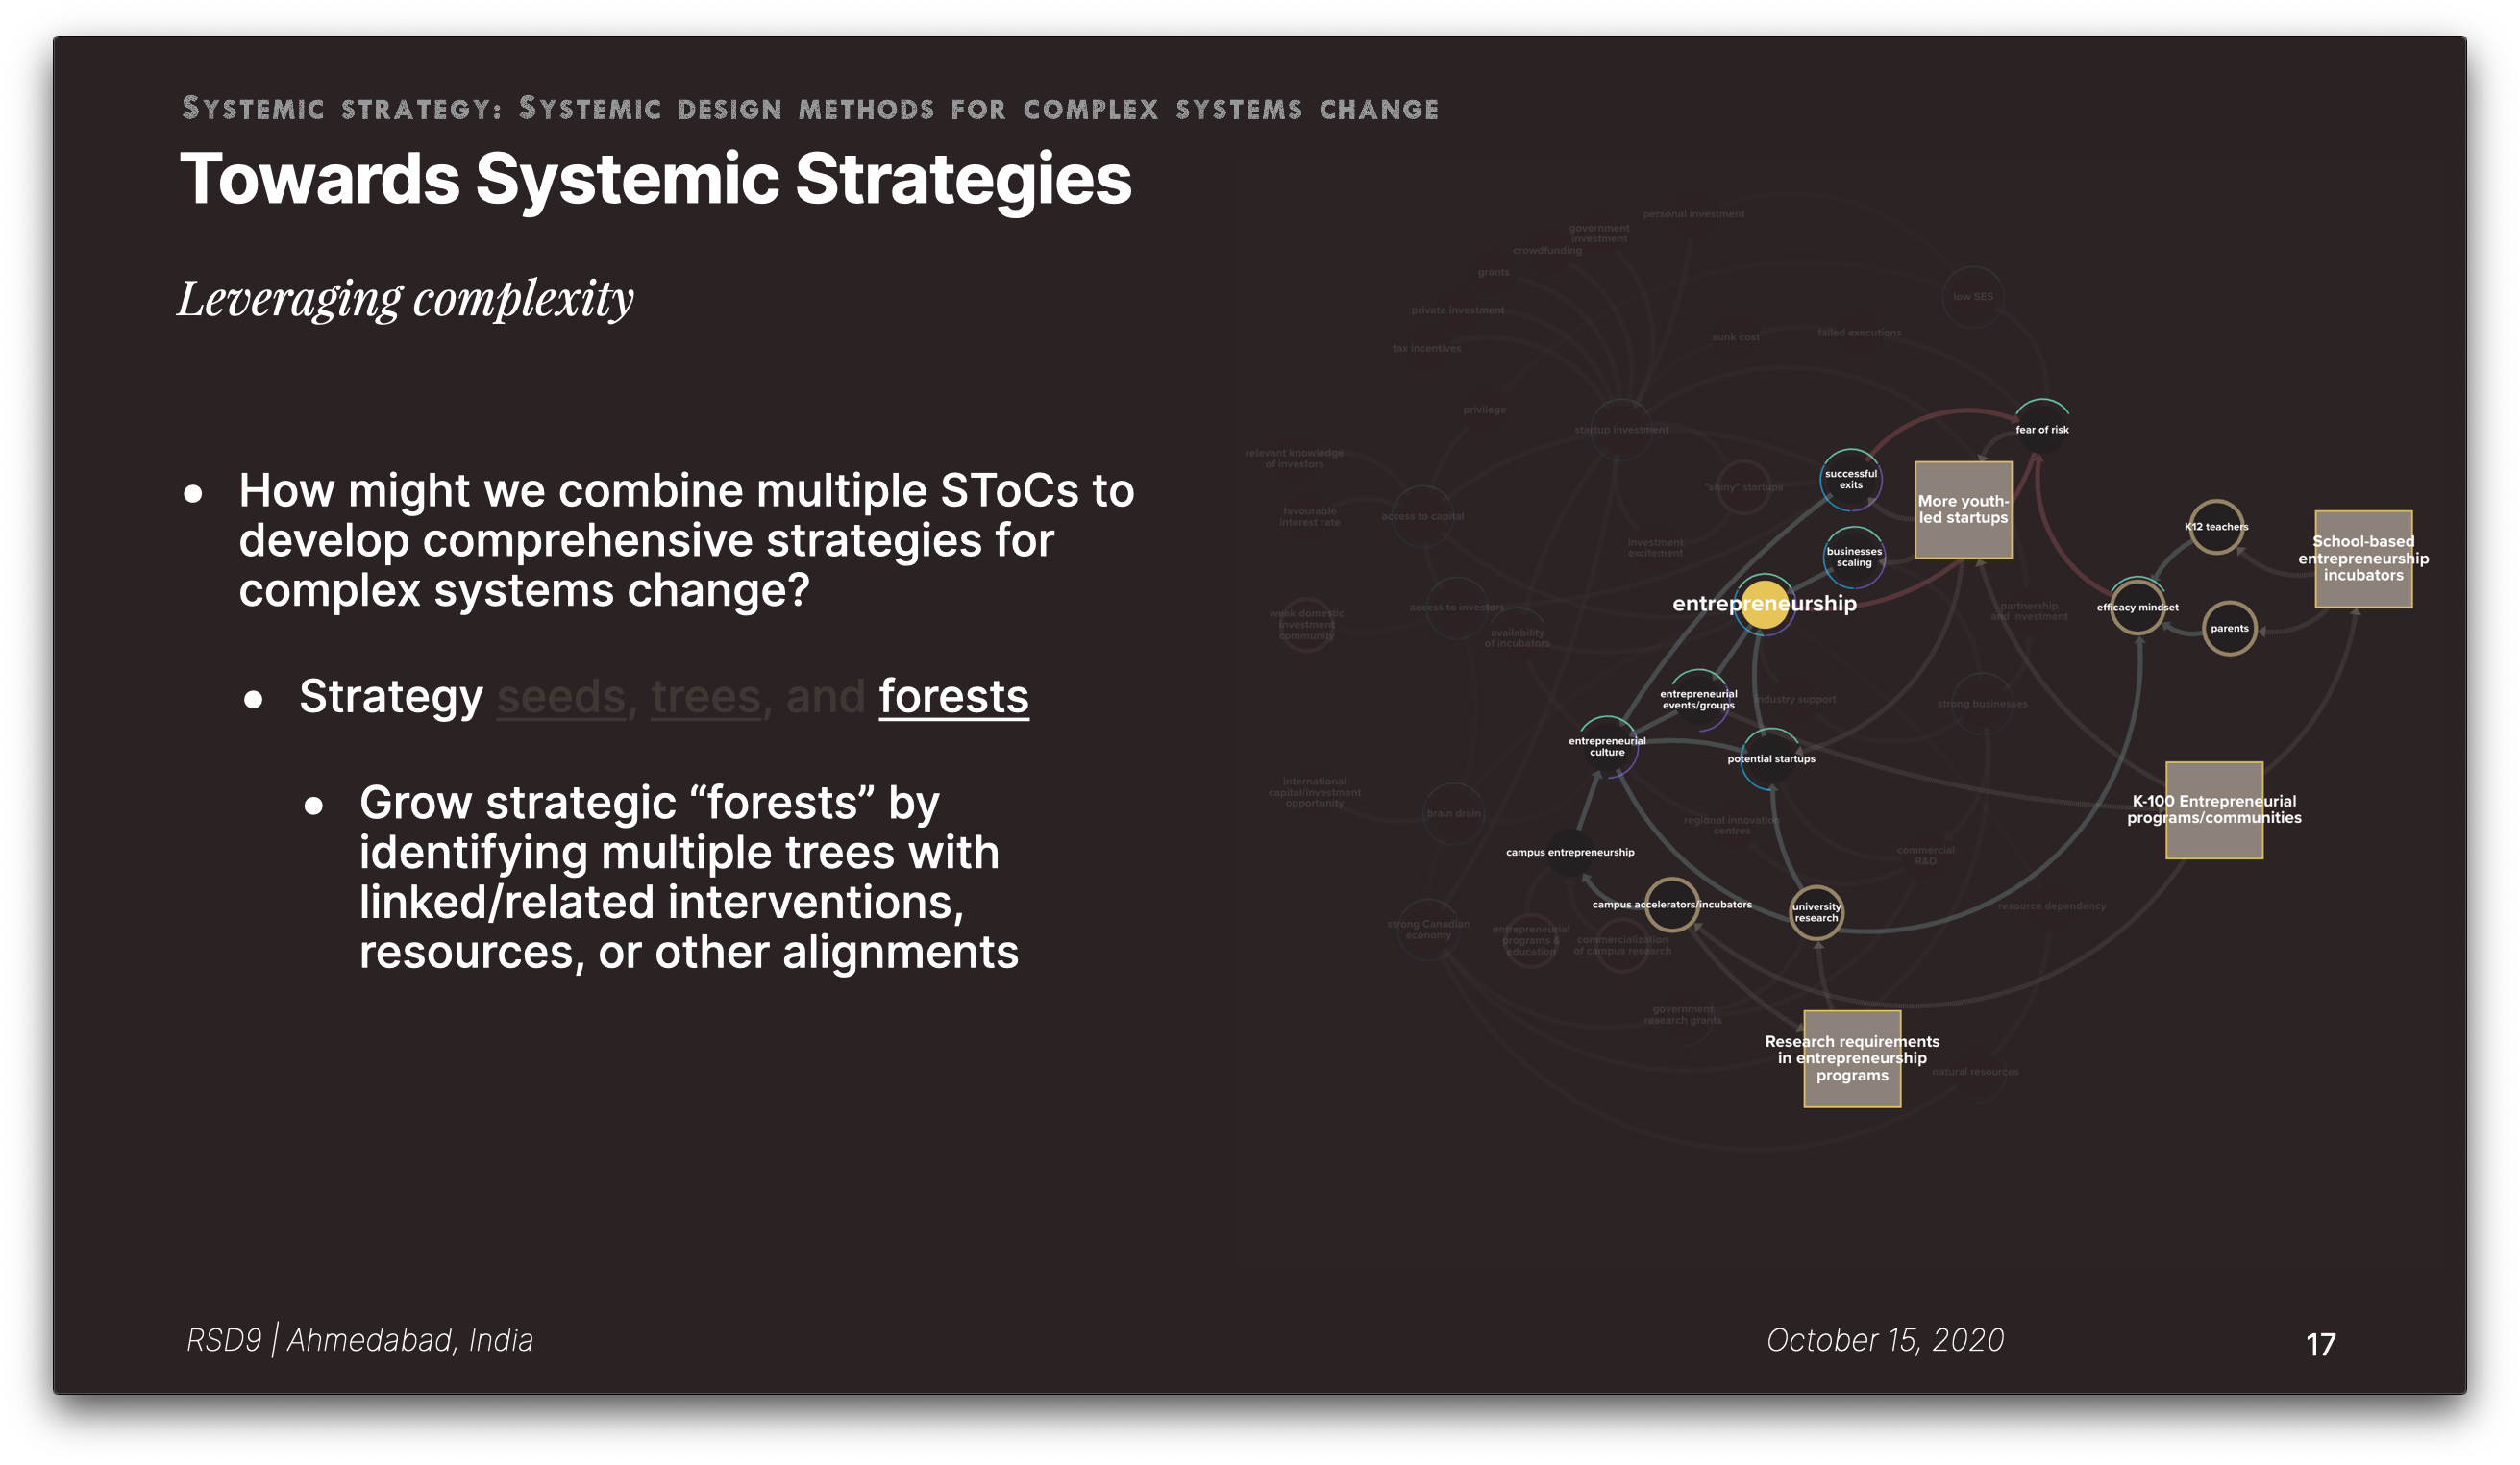 Towards systemic strategies: strategy forests